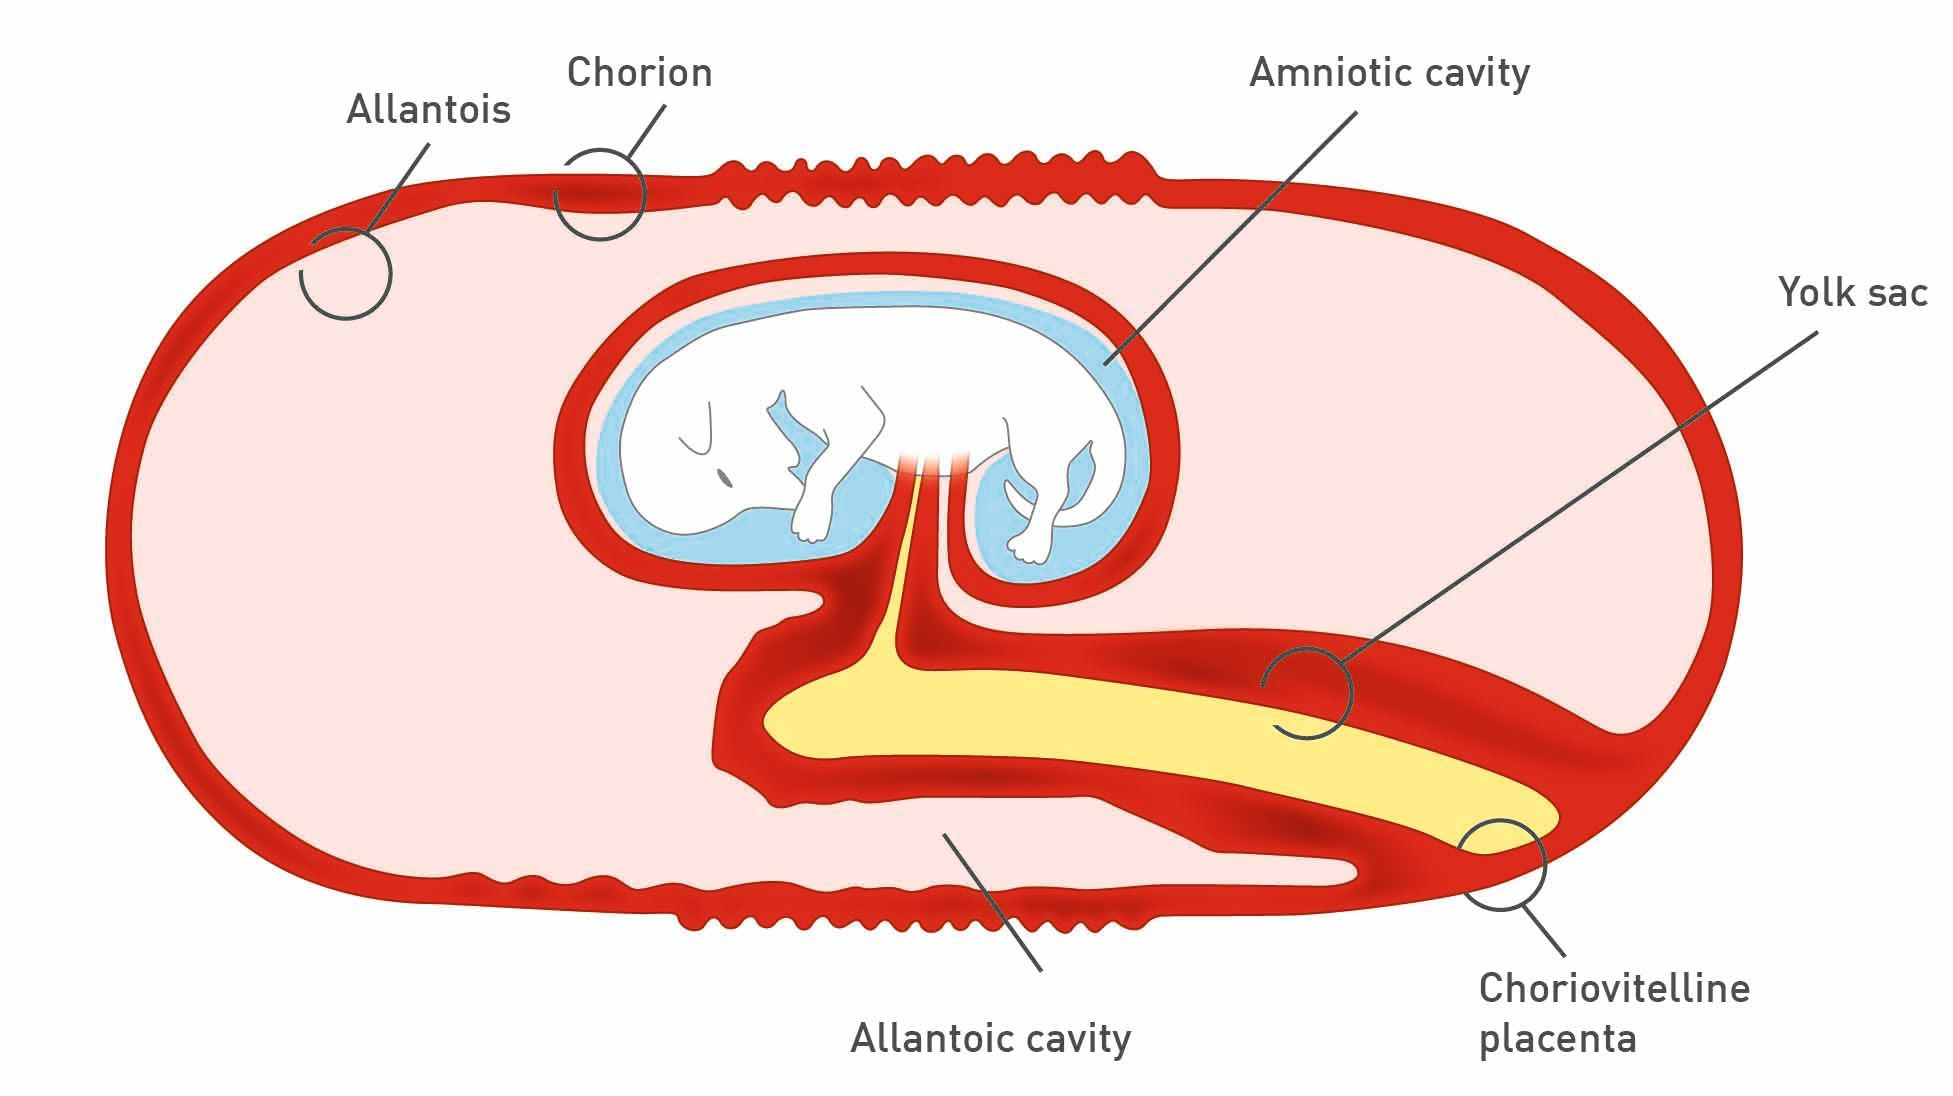 A schematic diagram of the canine placental structure in late pregnancy